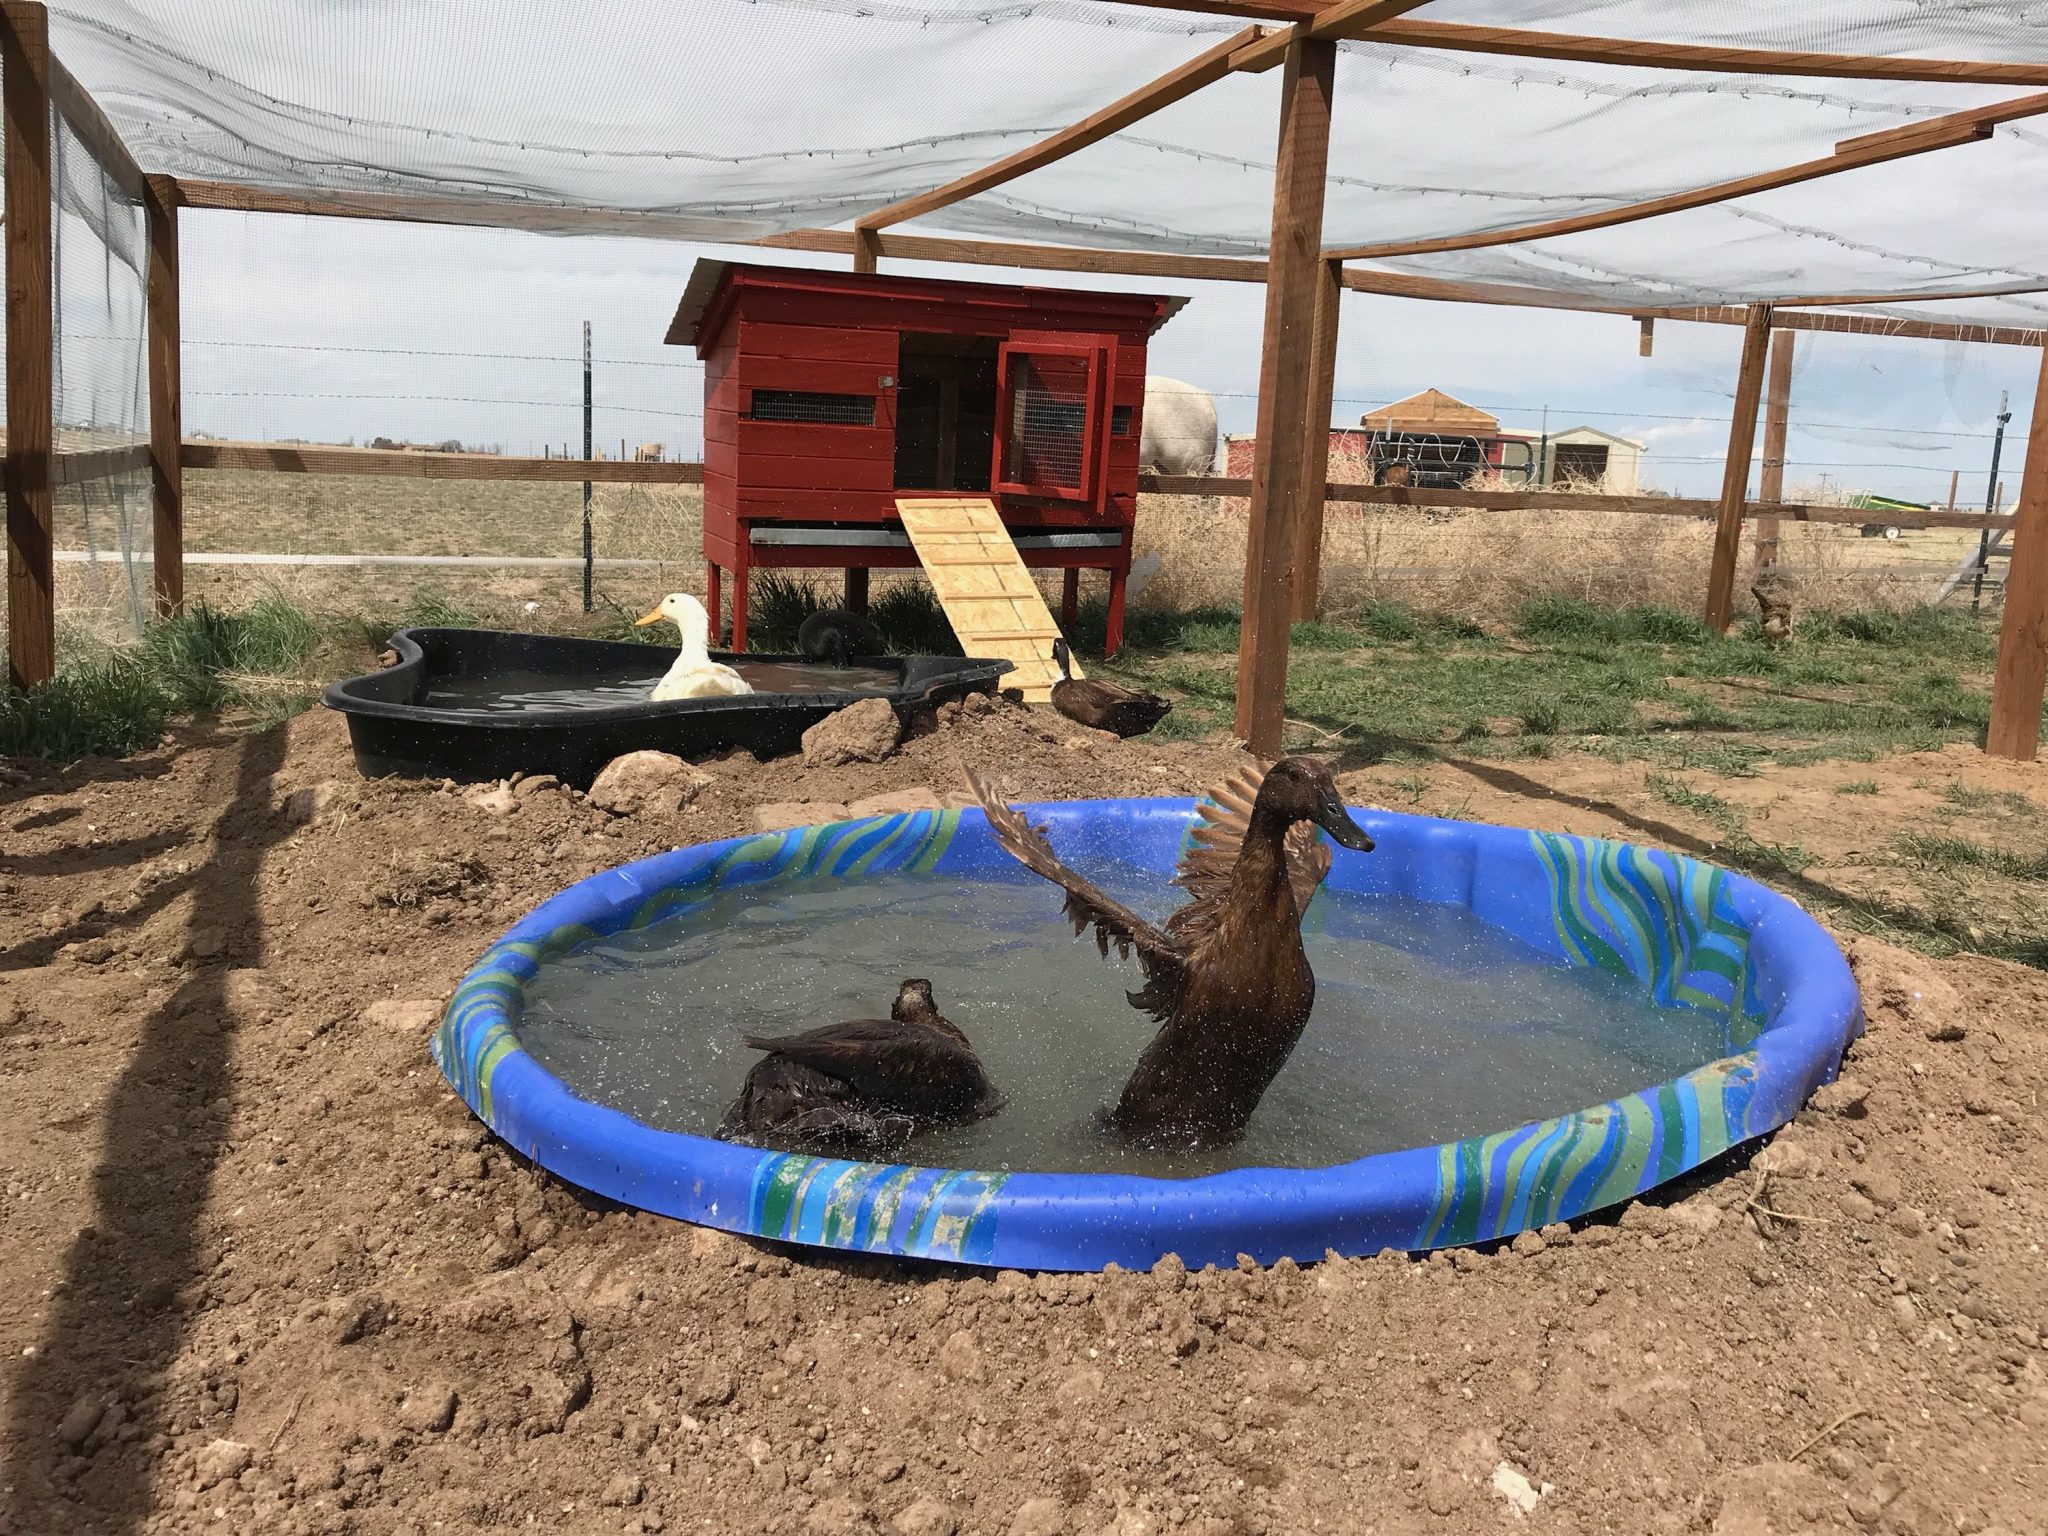 Ducks play in the wading pool of their new enclosure